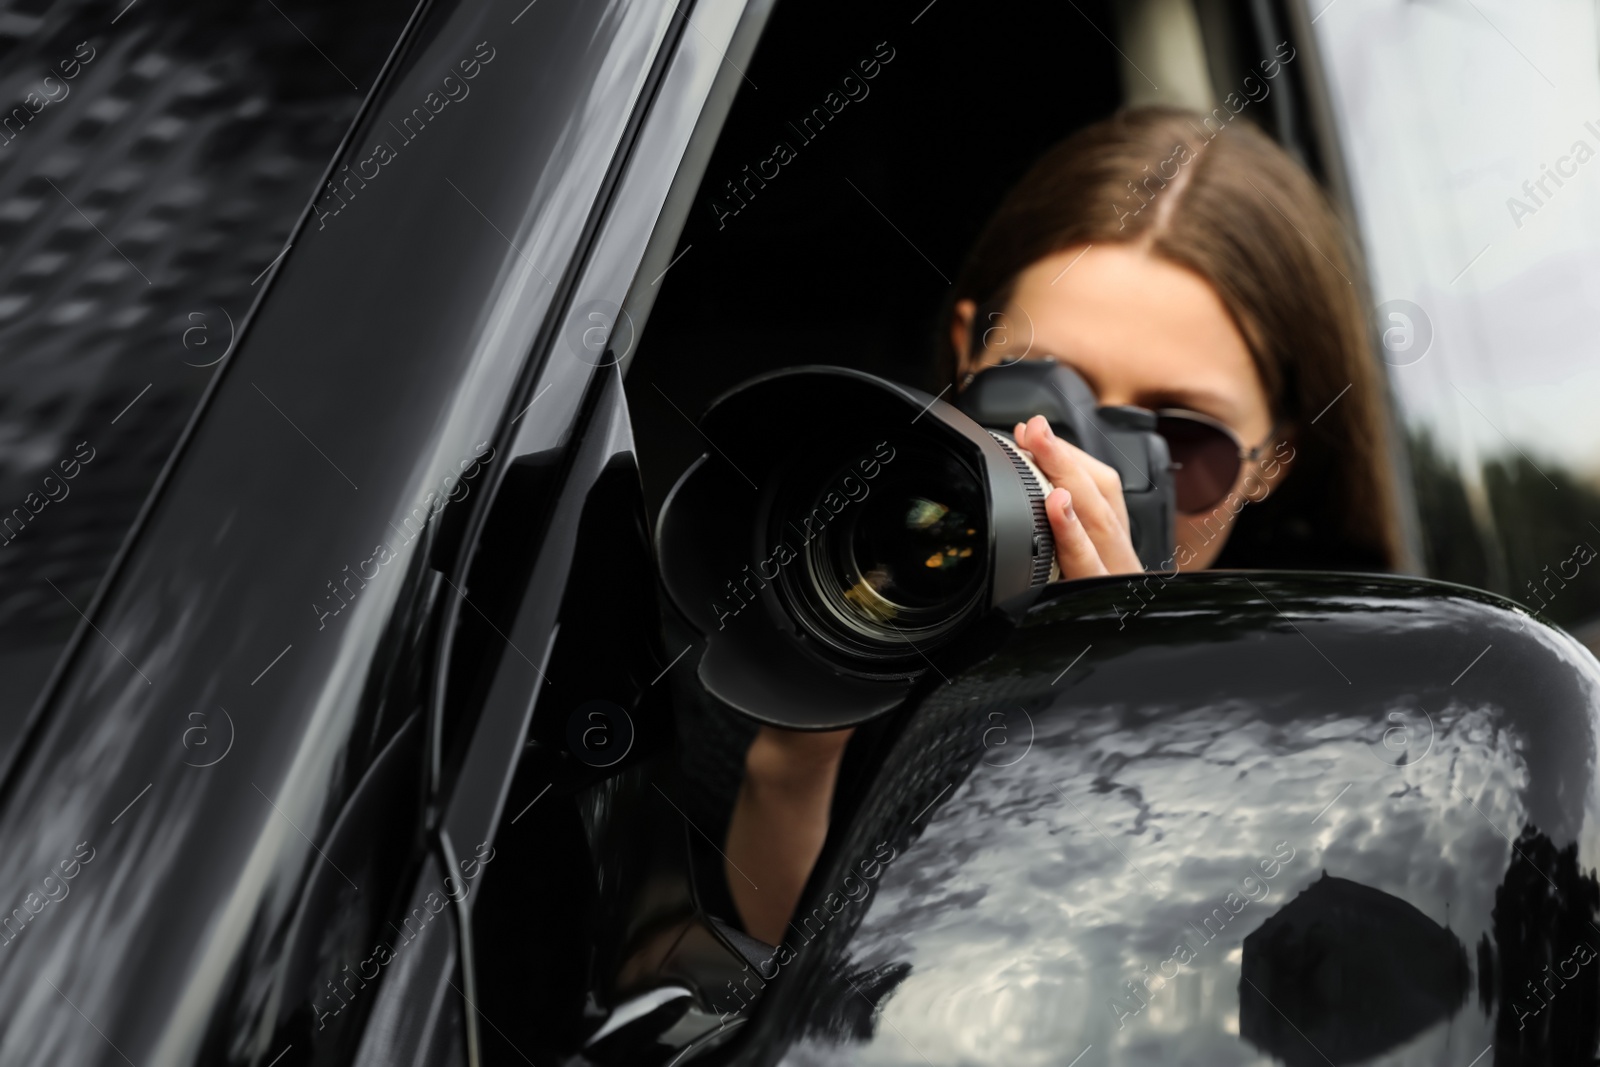 Photo of Private detective with camera spying from car, focus on lens